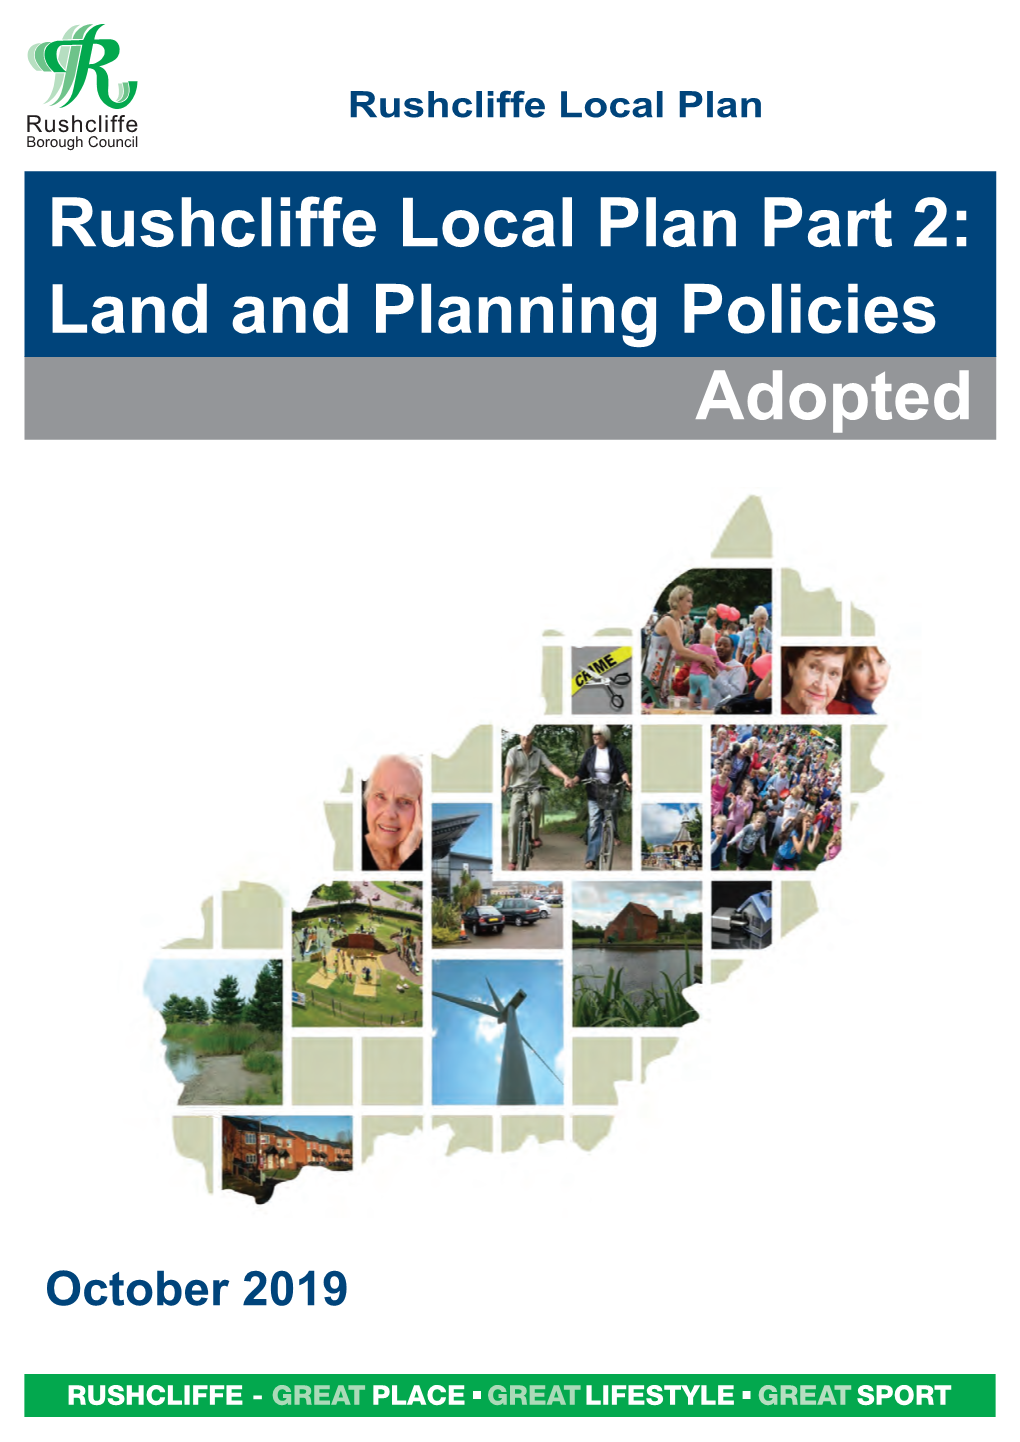 Rushcliffe Local Plan Part 2: Land and Planning Policies Adopted